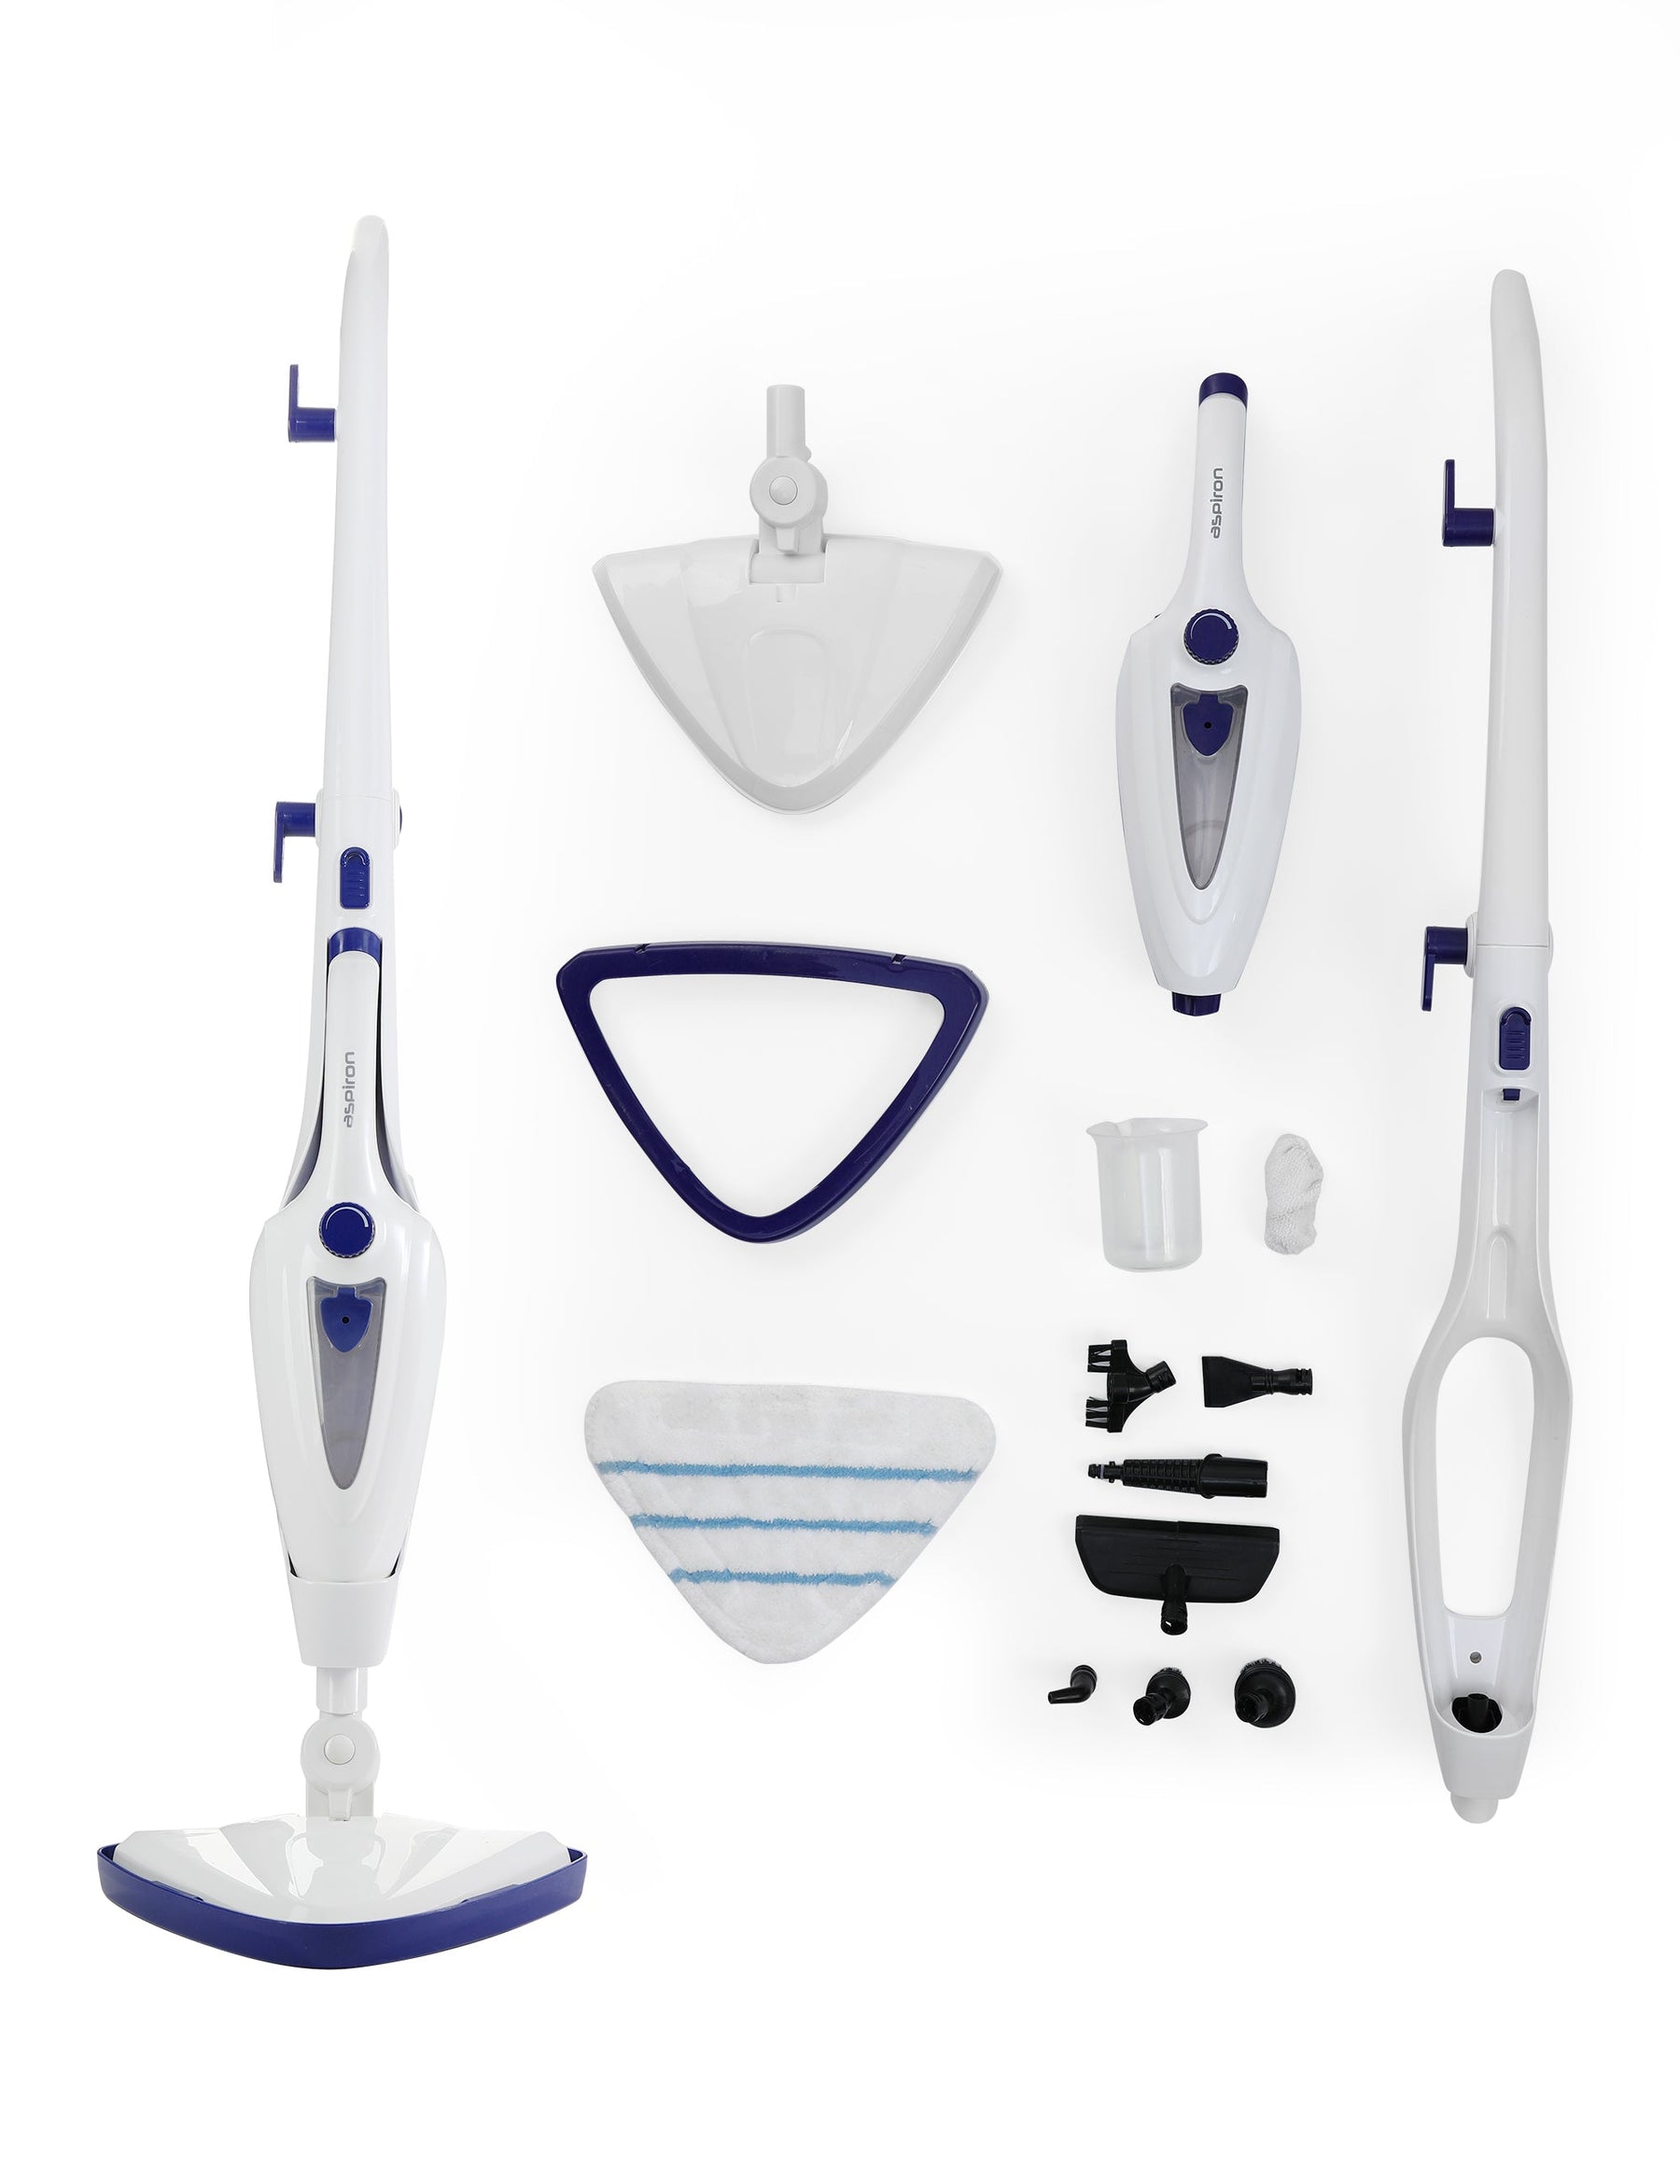 ASPIRON® Professional Steam Mop CA039, 15-Second Fast Heating, Large 385ml Water Tank 2024